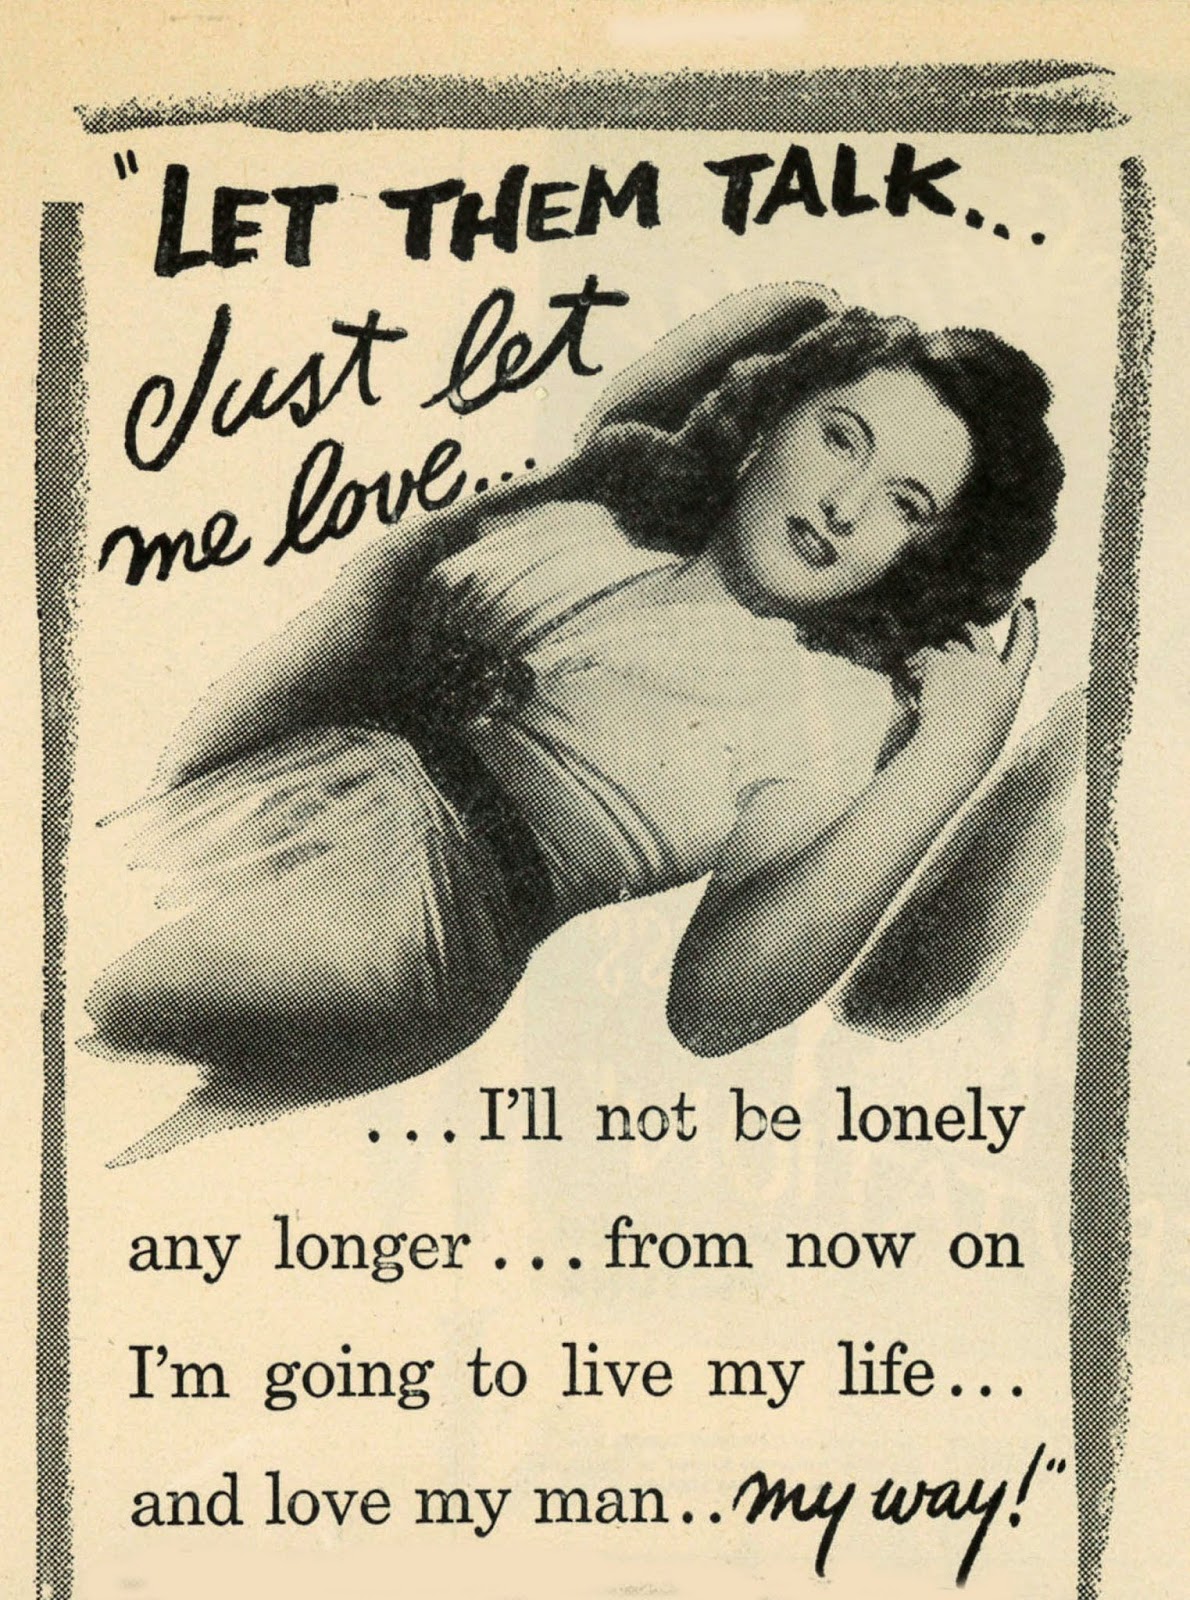 Greenbriar Picture Shows Shorthand For Sex In 40 S Melodrama